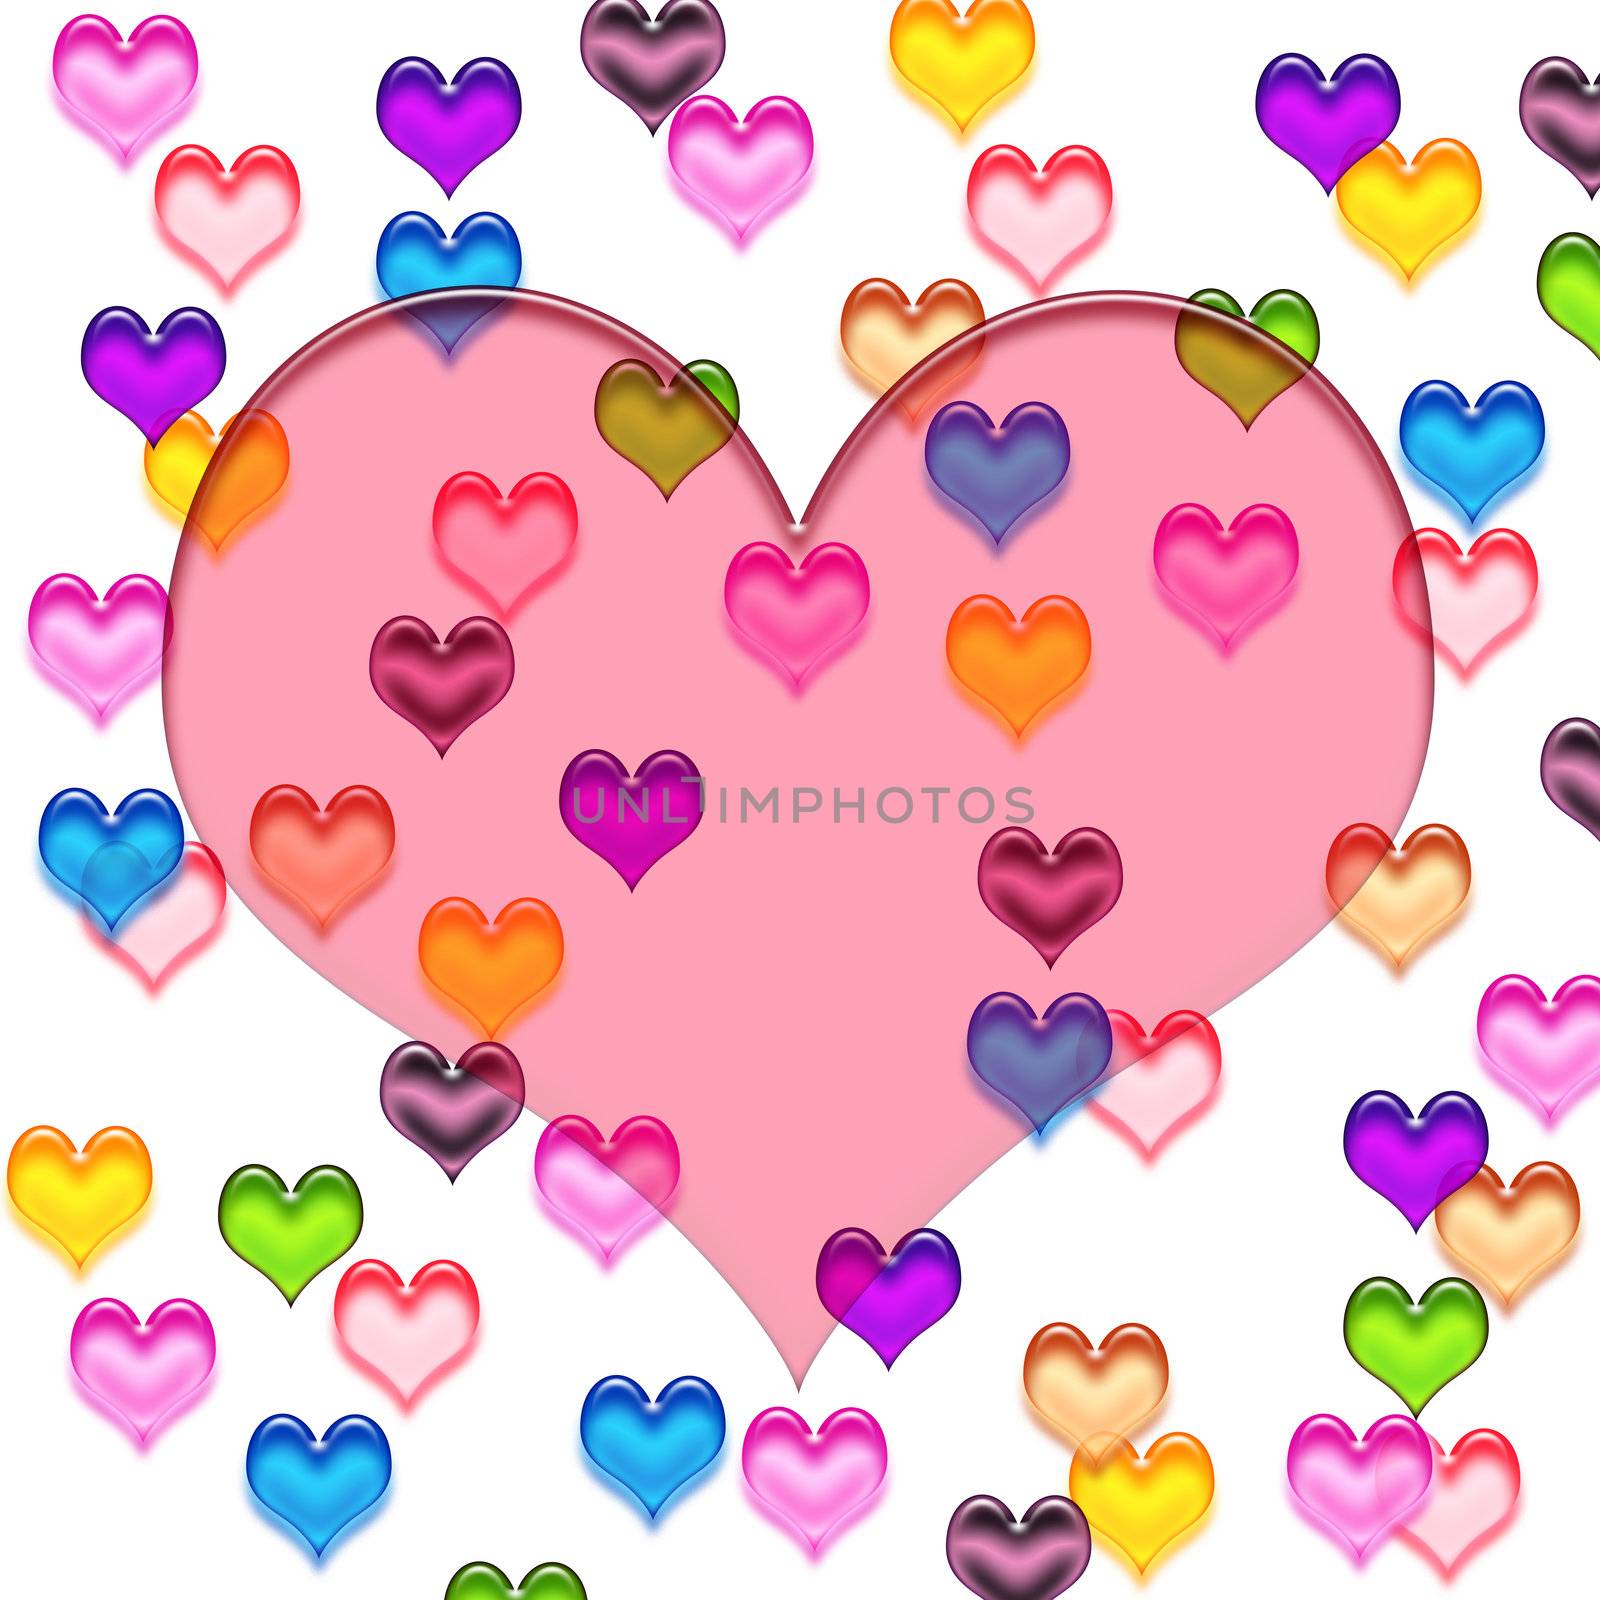 colorful glassy hearts pattern by weknow